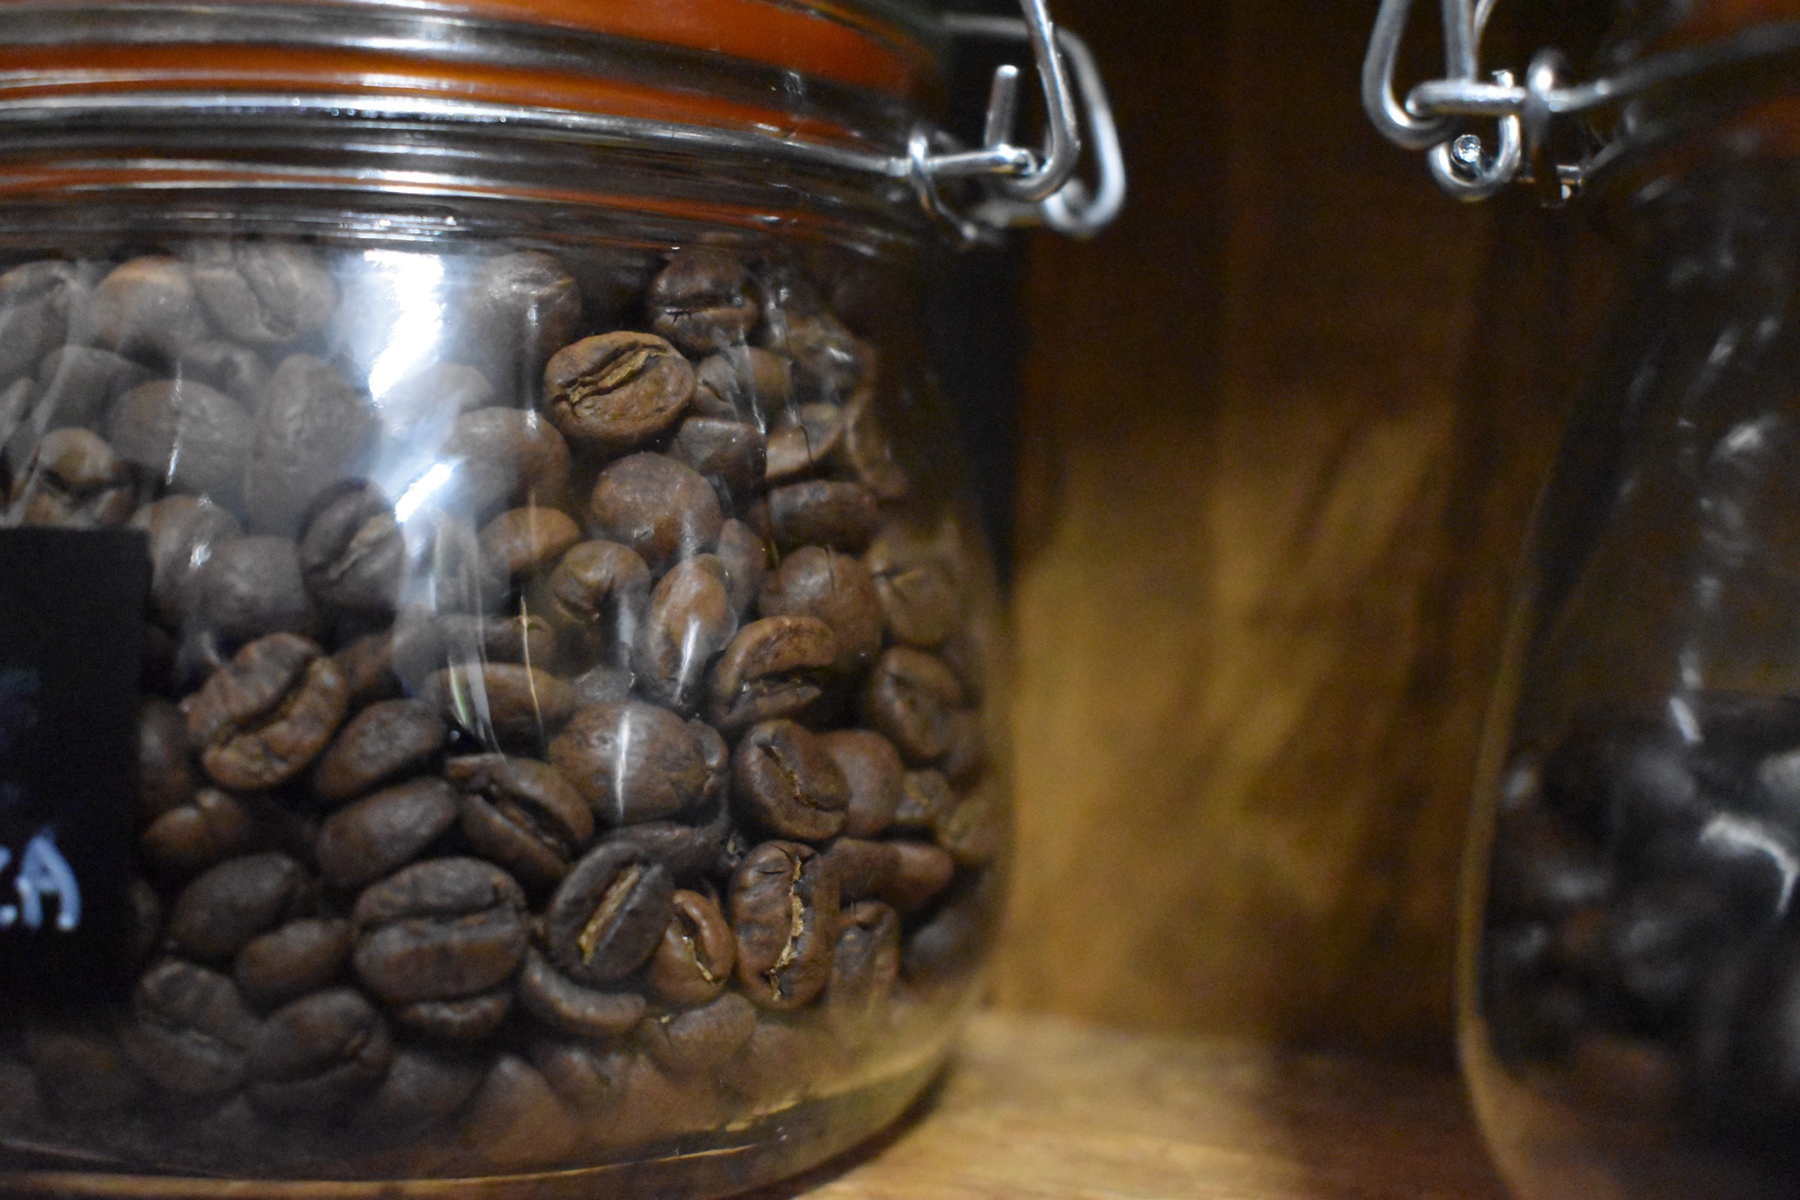 Close-up on a jar of coffee beans.